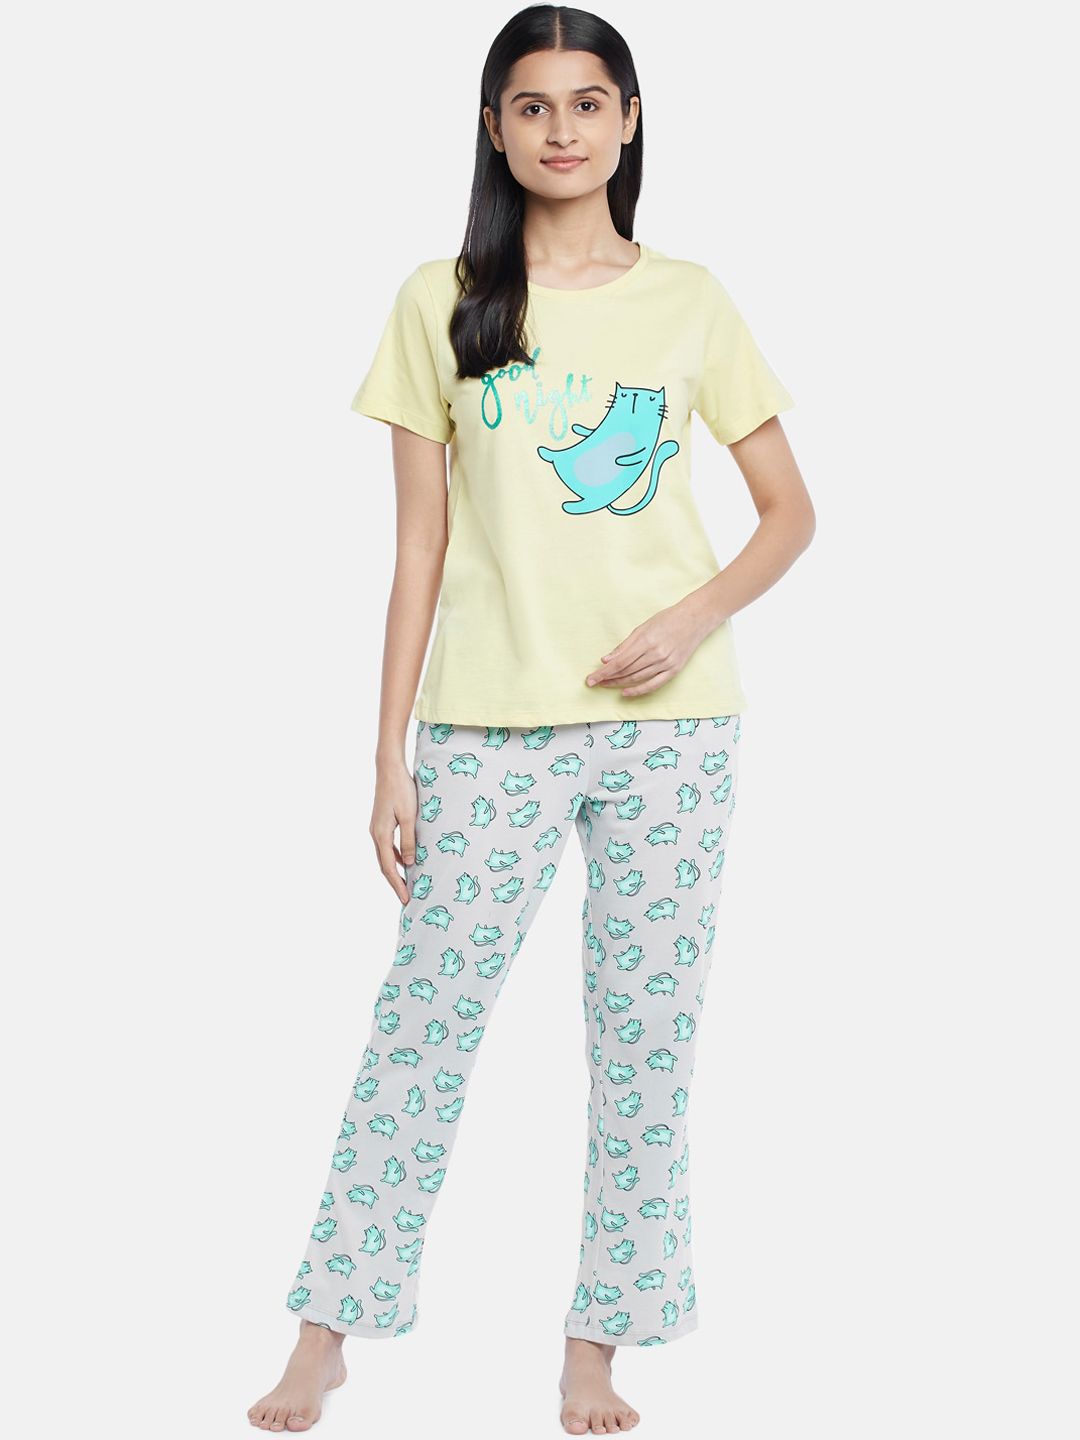 Dreamz by Pantaloons Women Yellow & Blue Graphic Printed Night suit Price in India